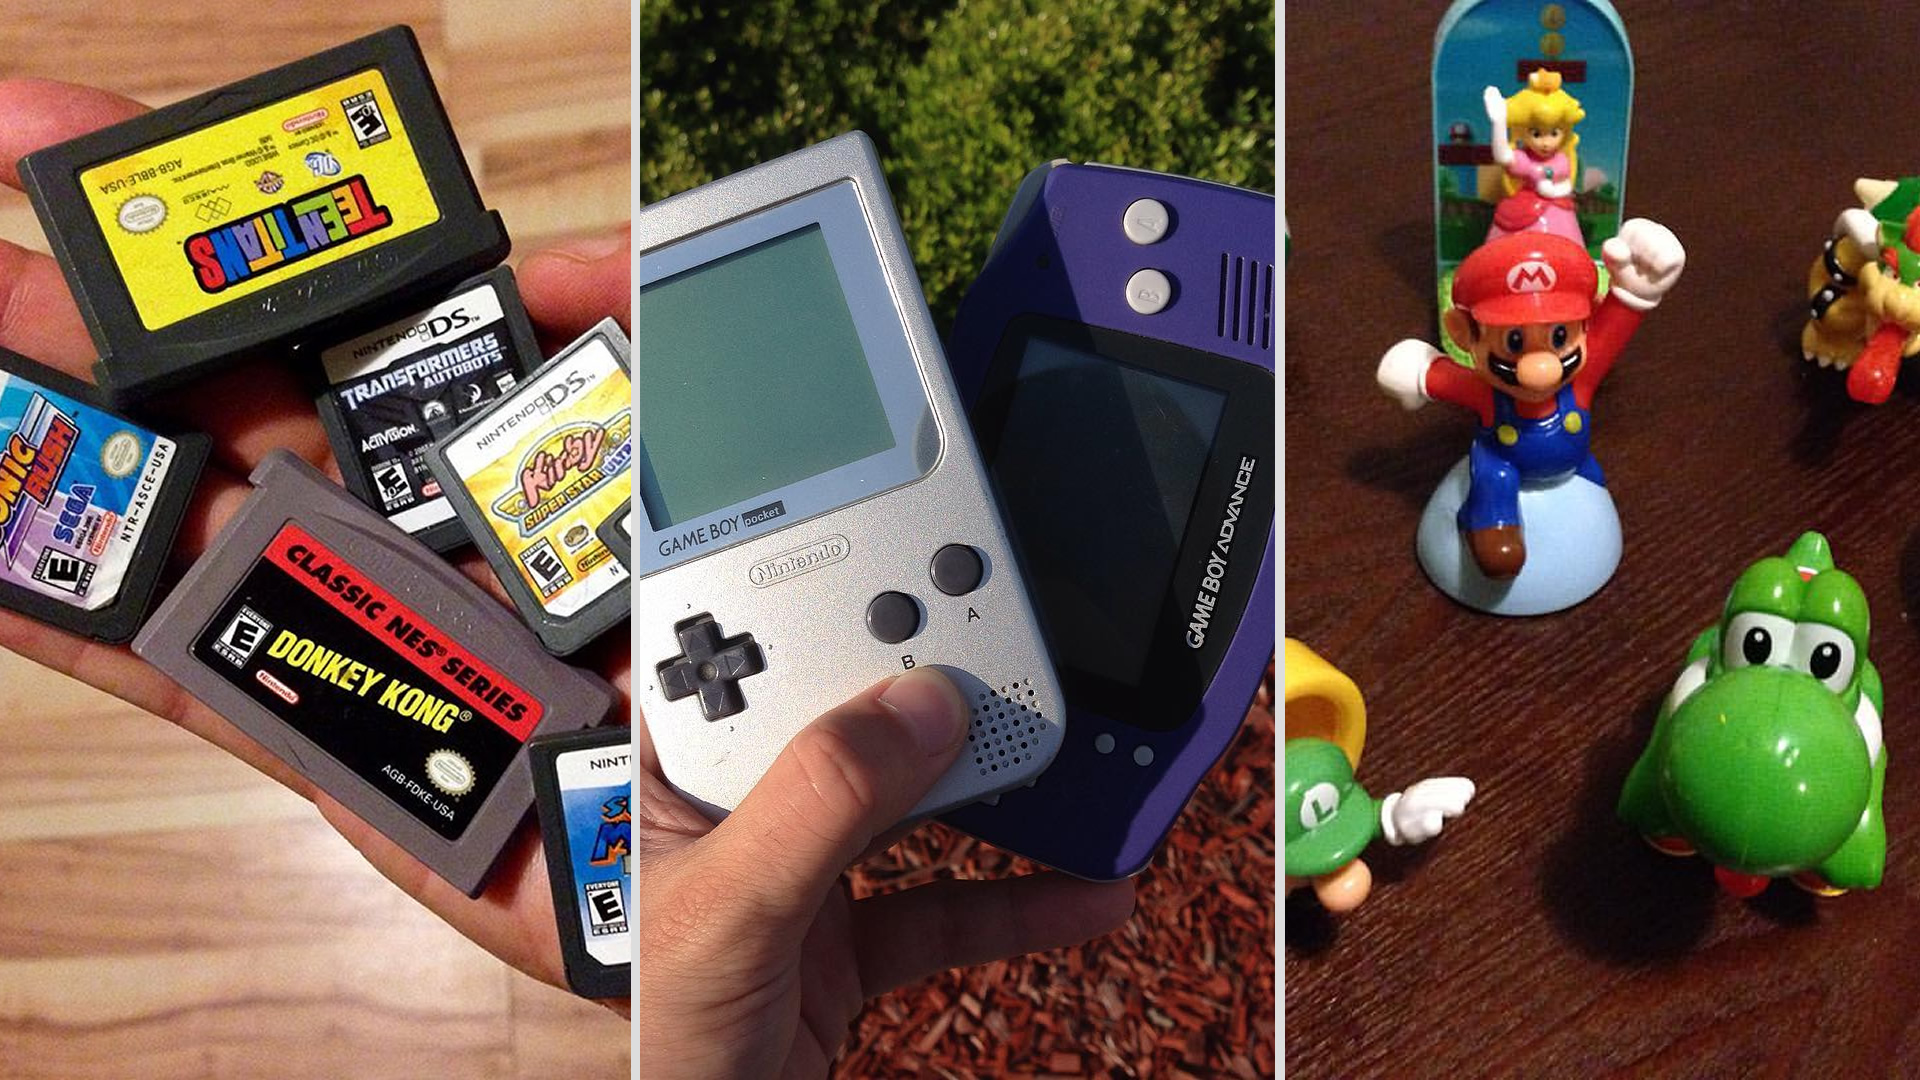 The Retro World Interview: Classic Nintendo Games and Figures